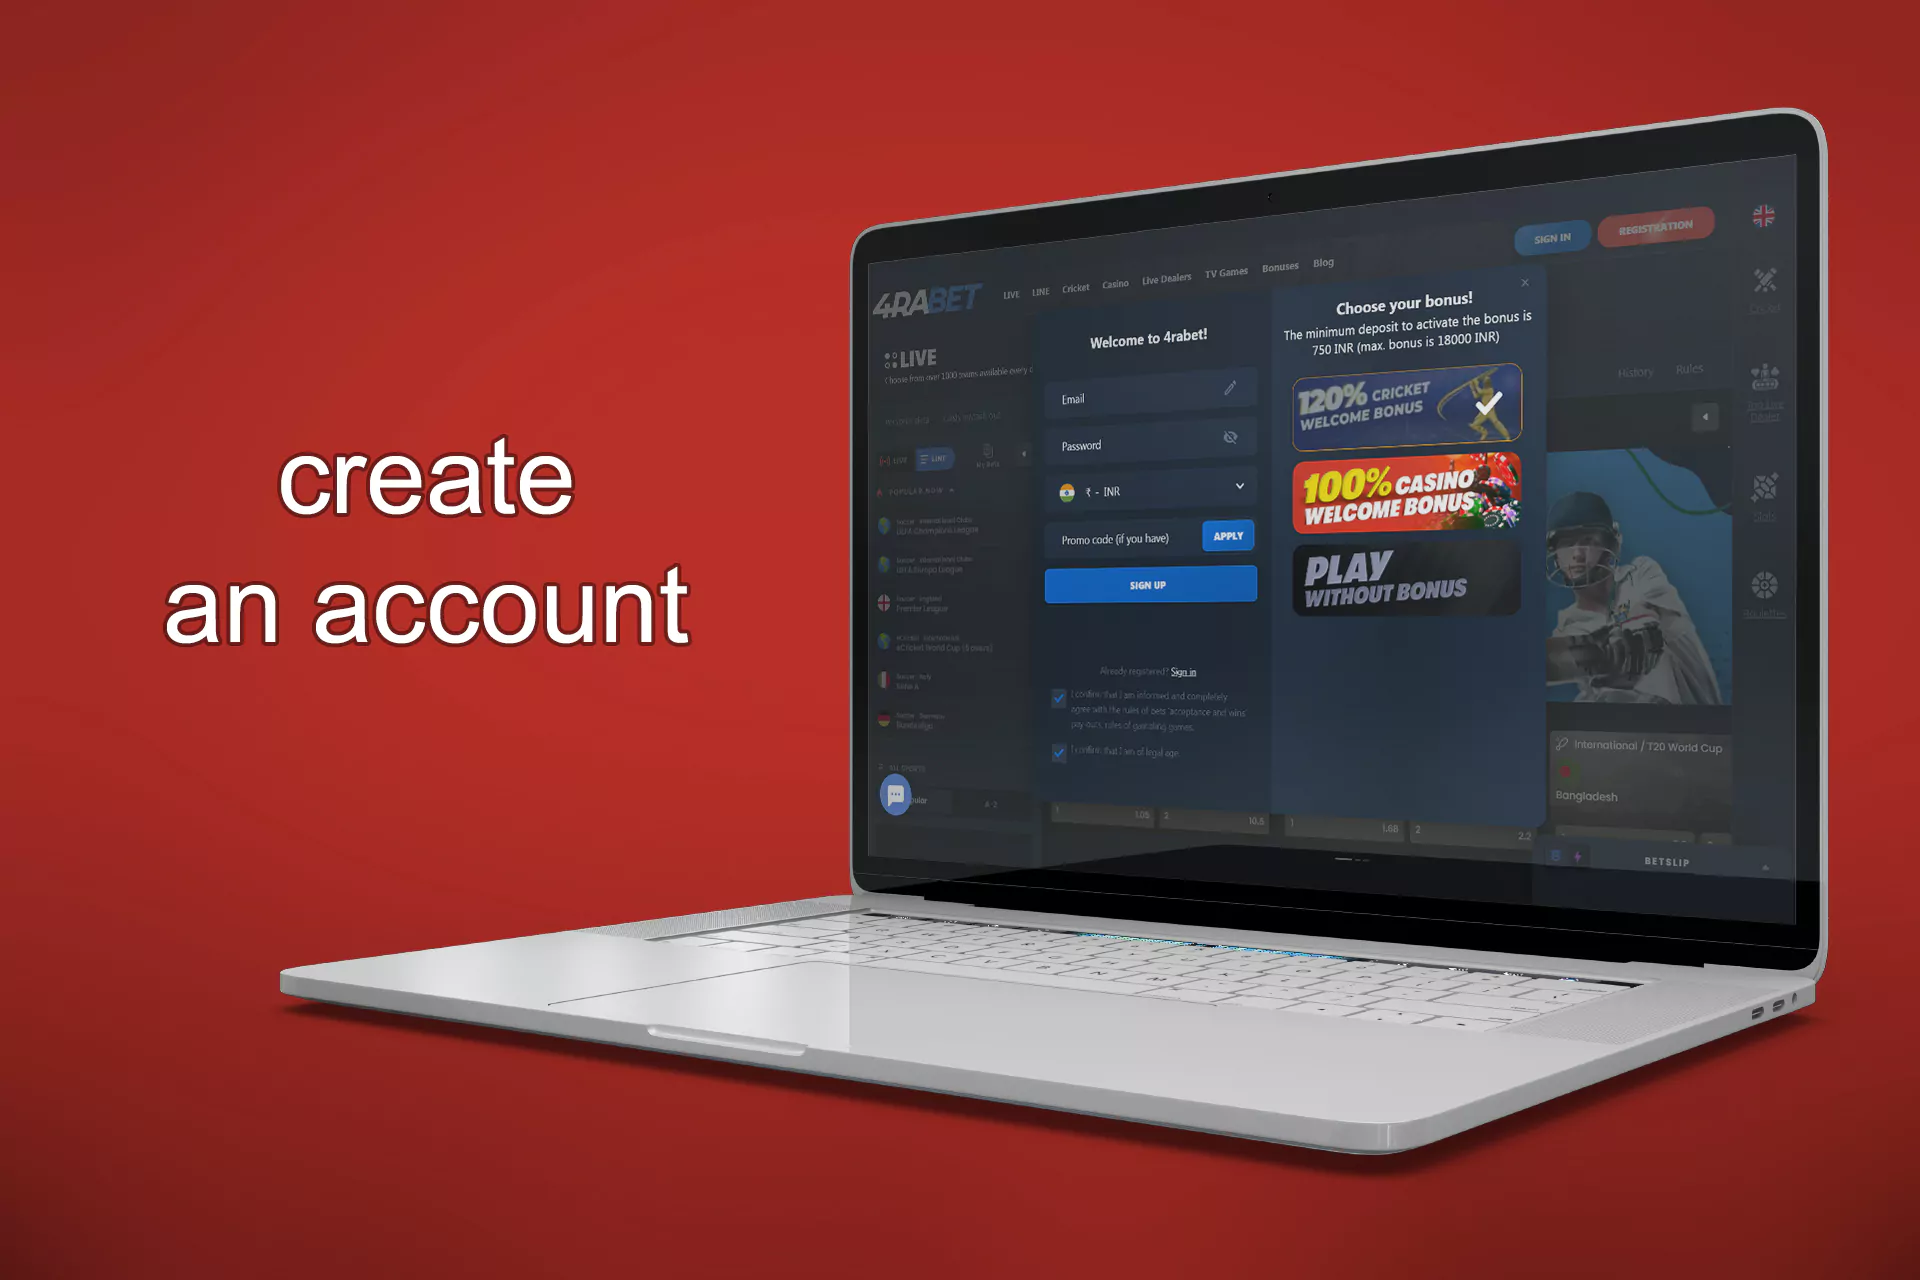 Create an account to start betting in 4rabet.